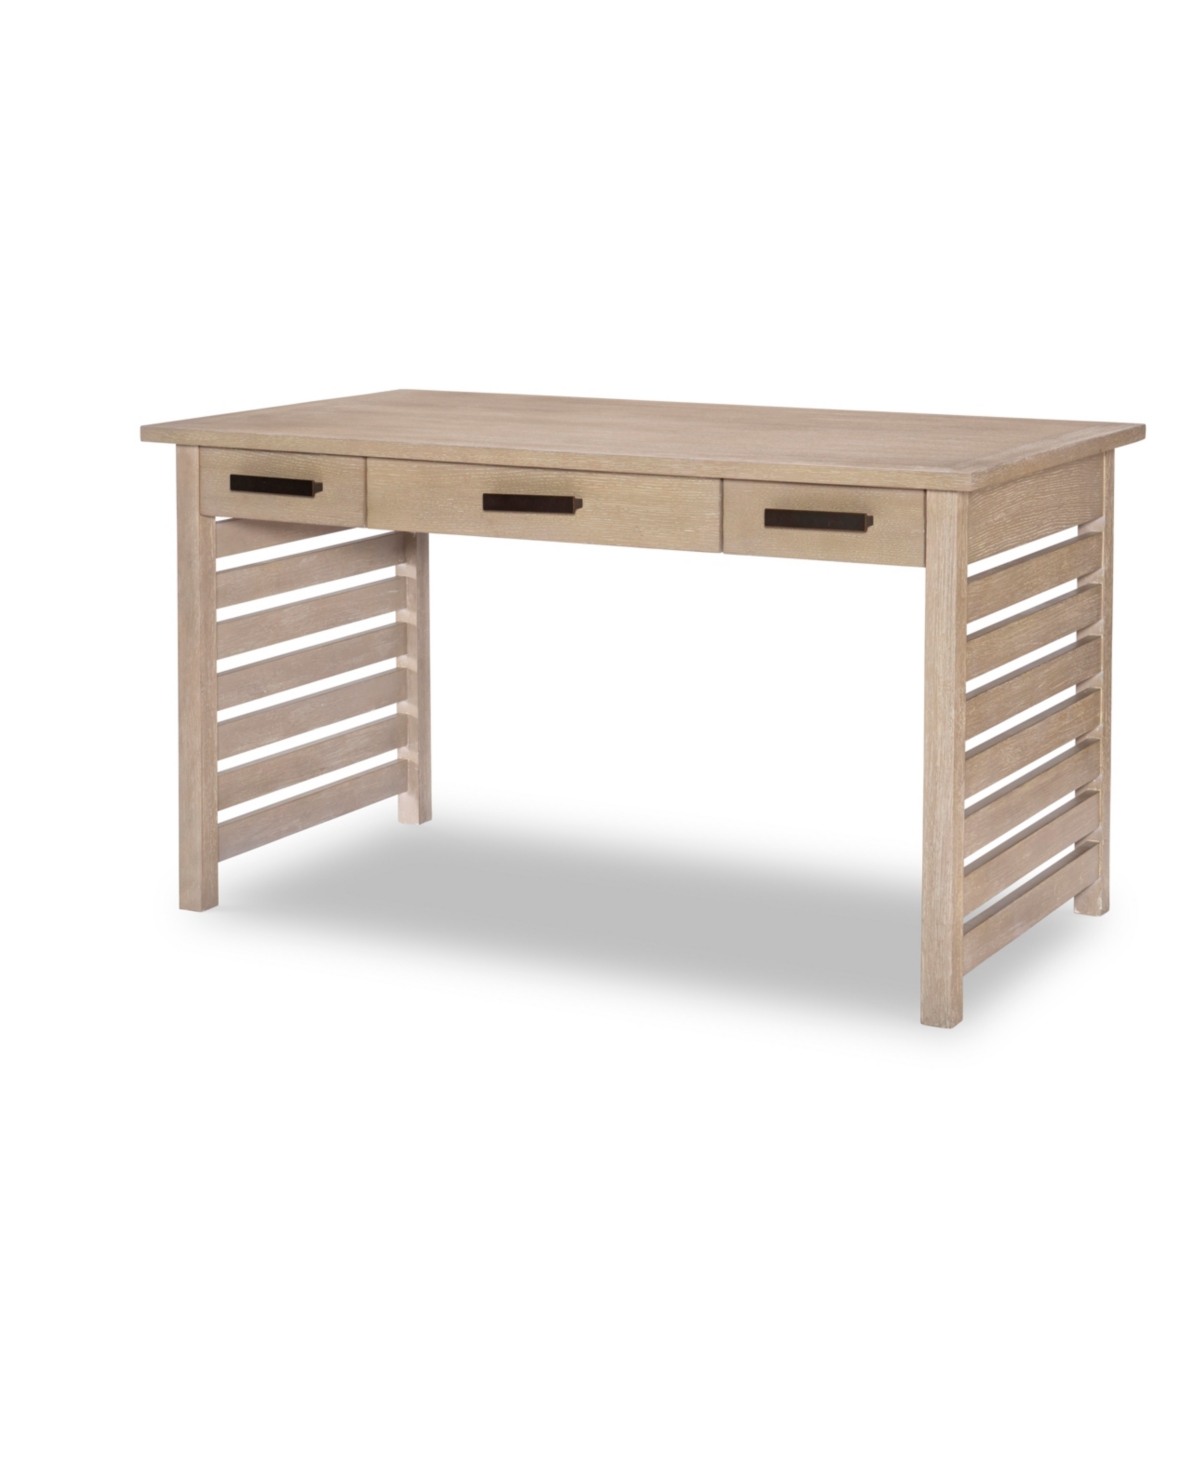 Furniture Edgewater 3 Drawers Desk In Soft Sand